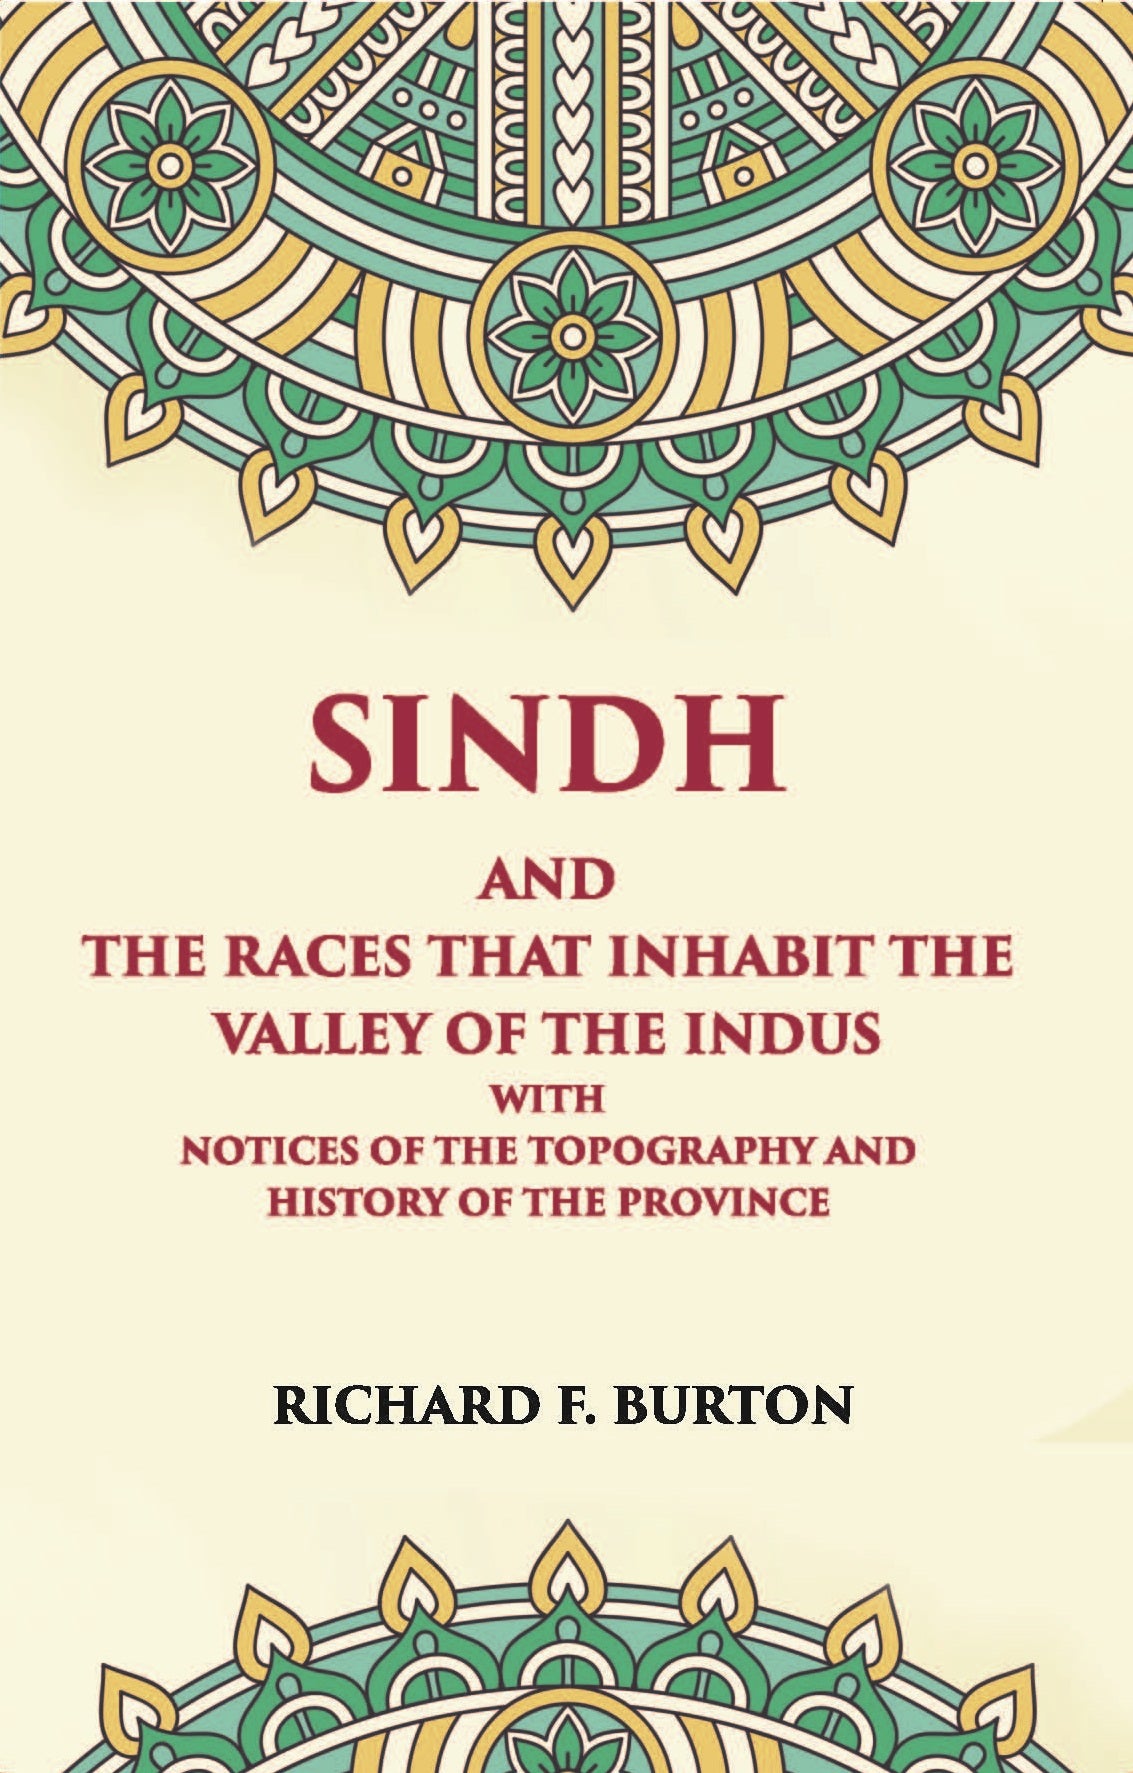 Sindh And The Races That Inhabit The Valley Of The Indus: With Notices Of The Topography And History Of Province